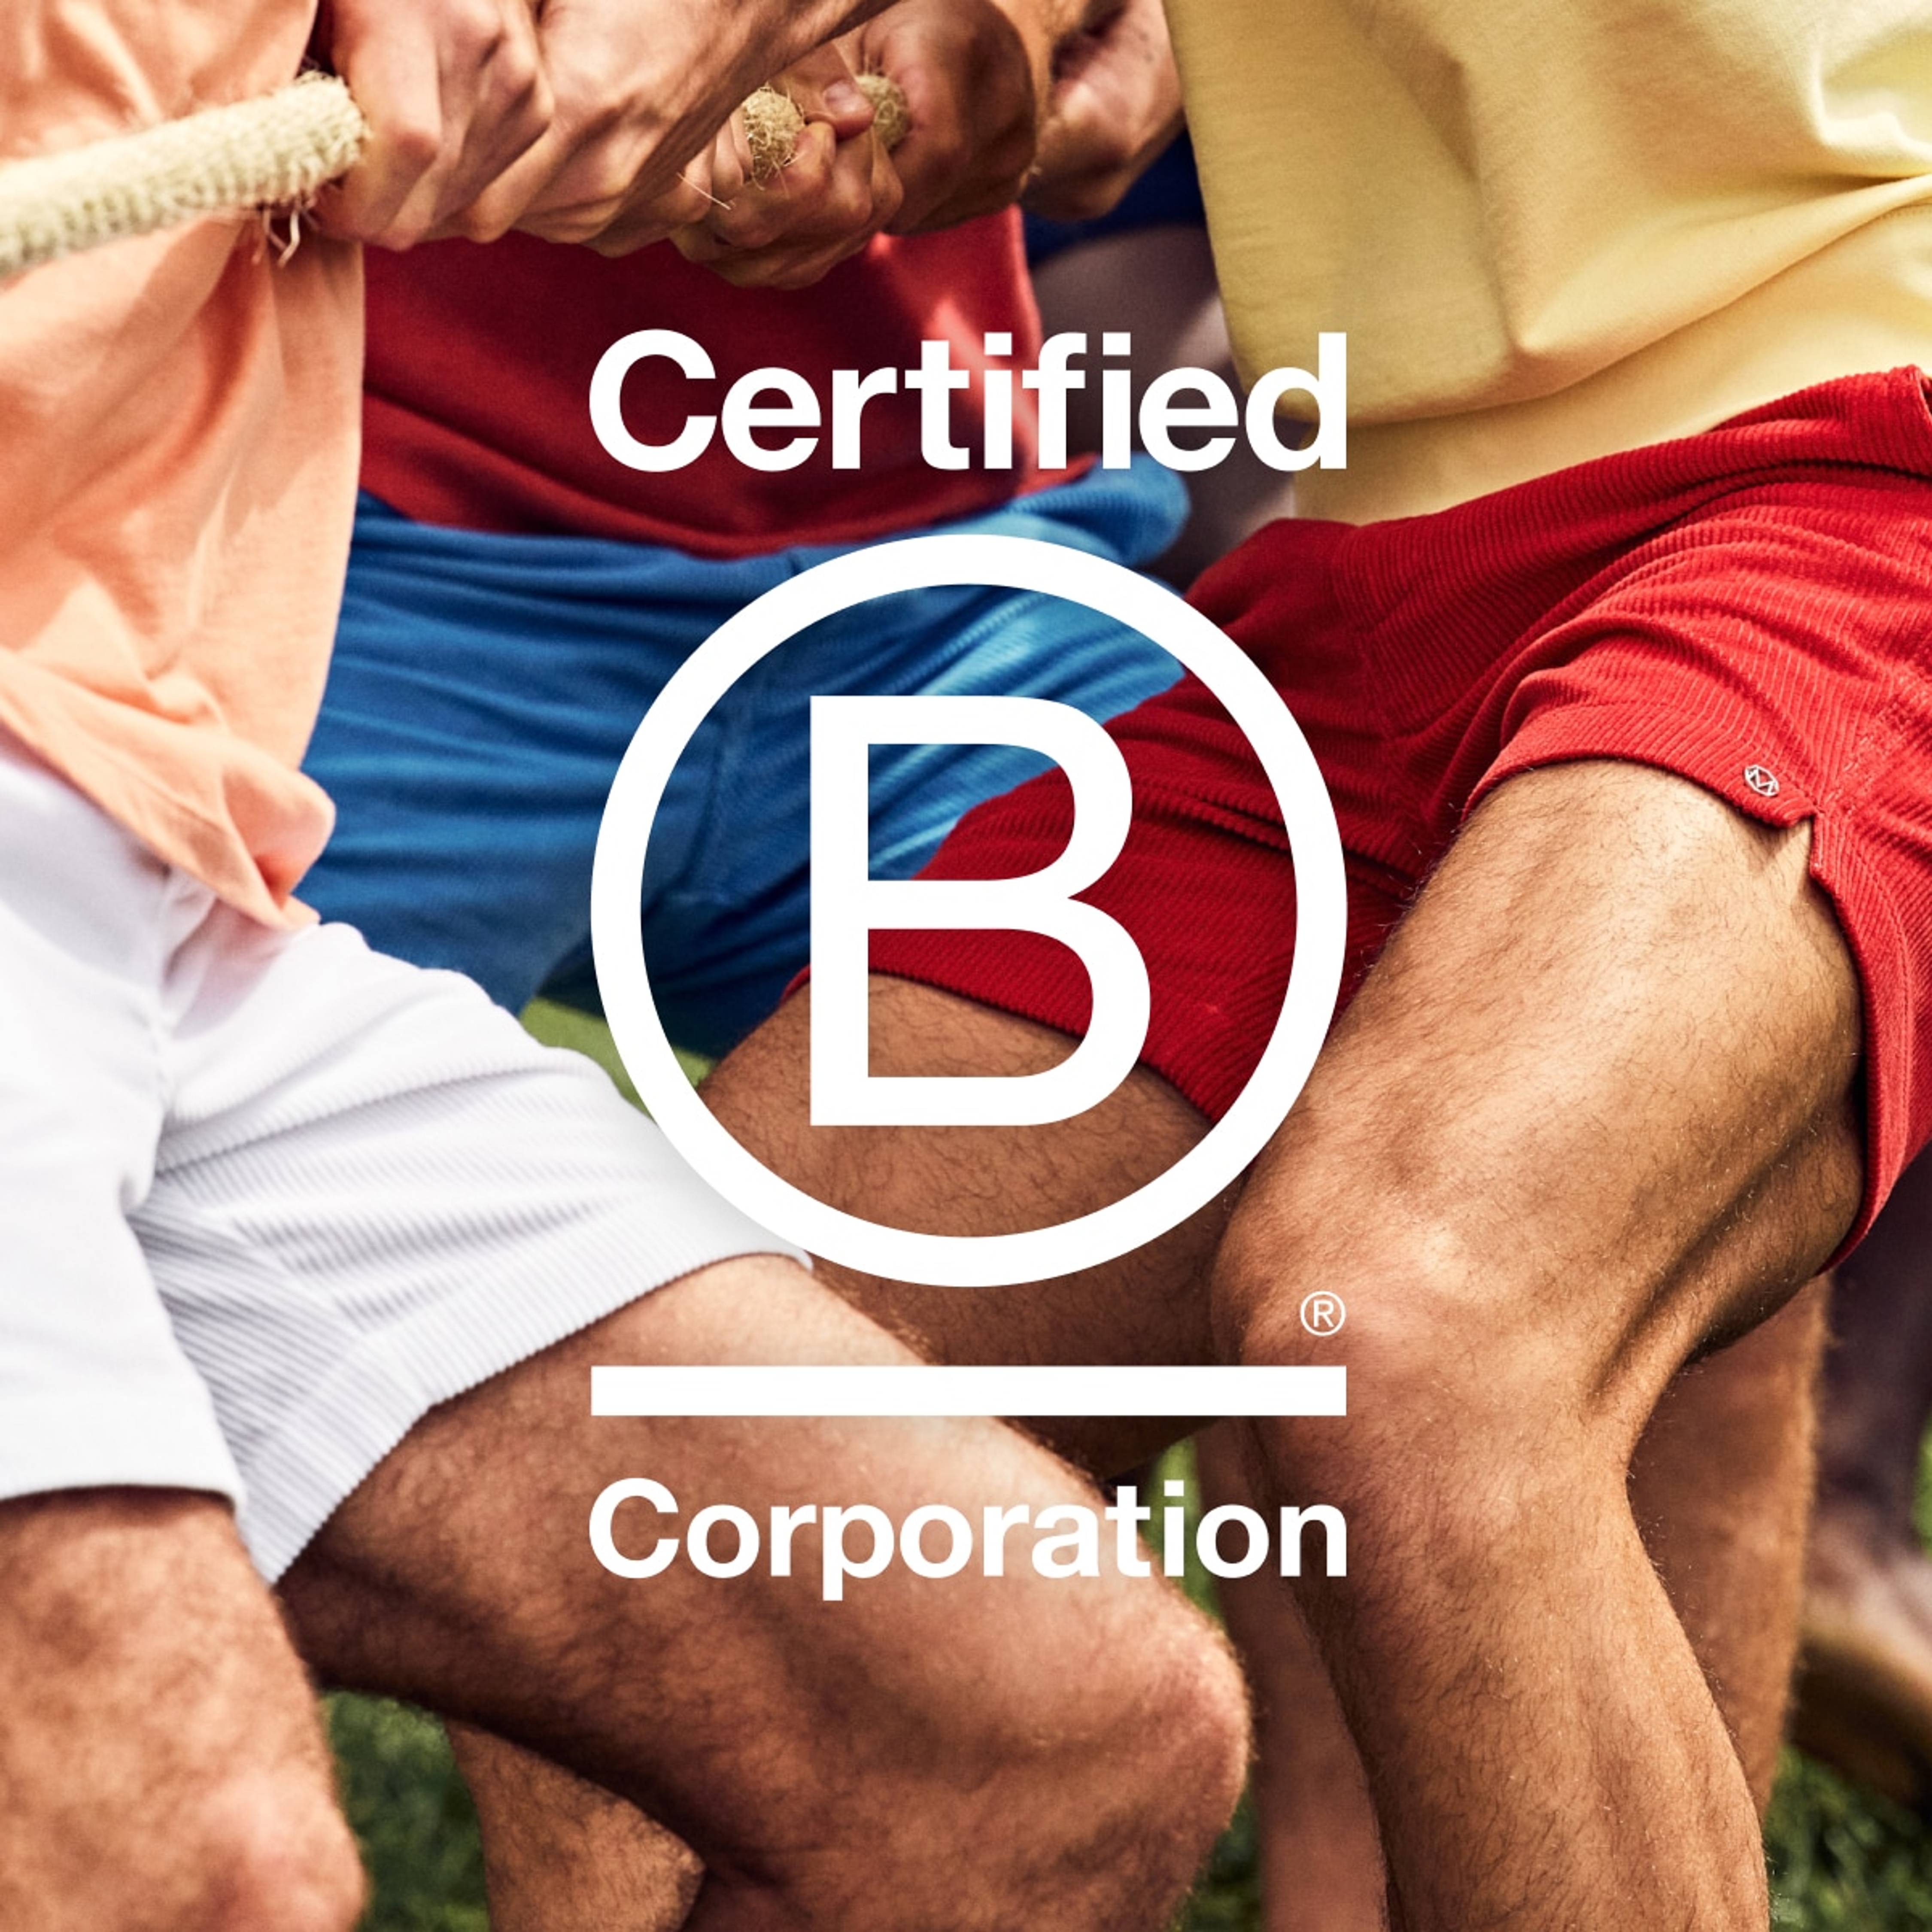 Certified Bcorp